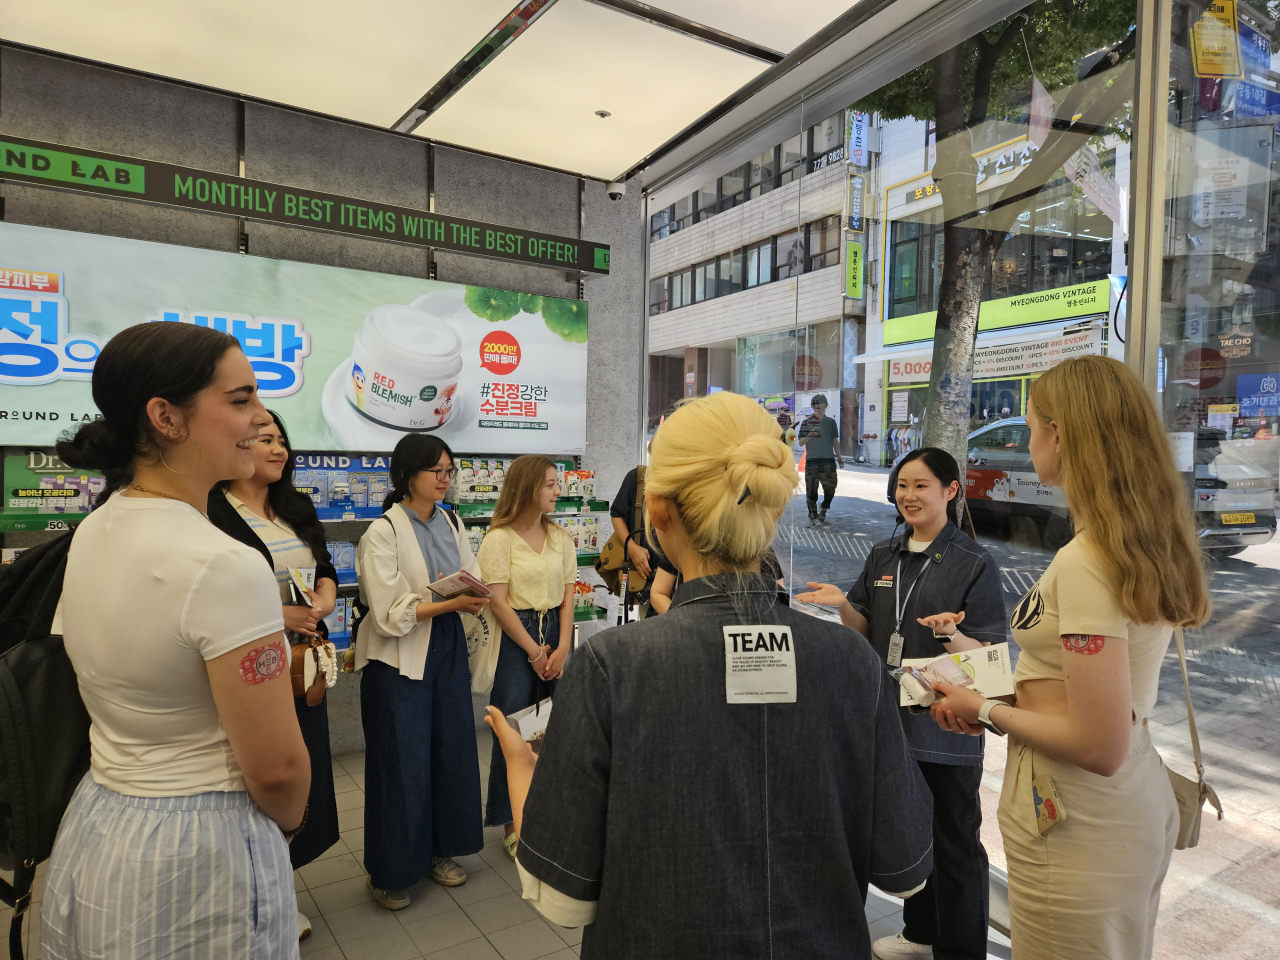 Participants listen to an Olive Young staff member's instructions for its K-beauty docent program at a branch in Myeong-dong, Seoul, Wednesday. (Kim Hae-yeon/The Korea Herald)